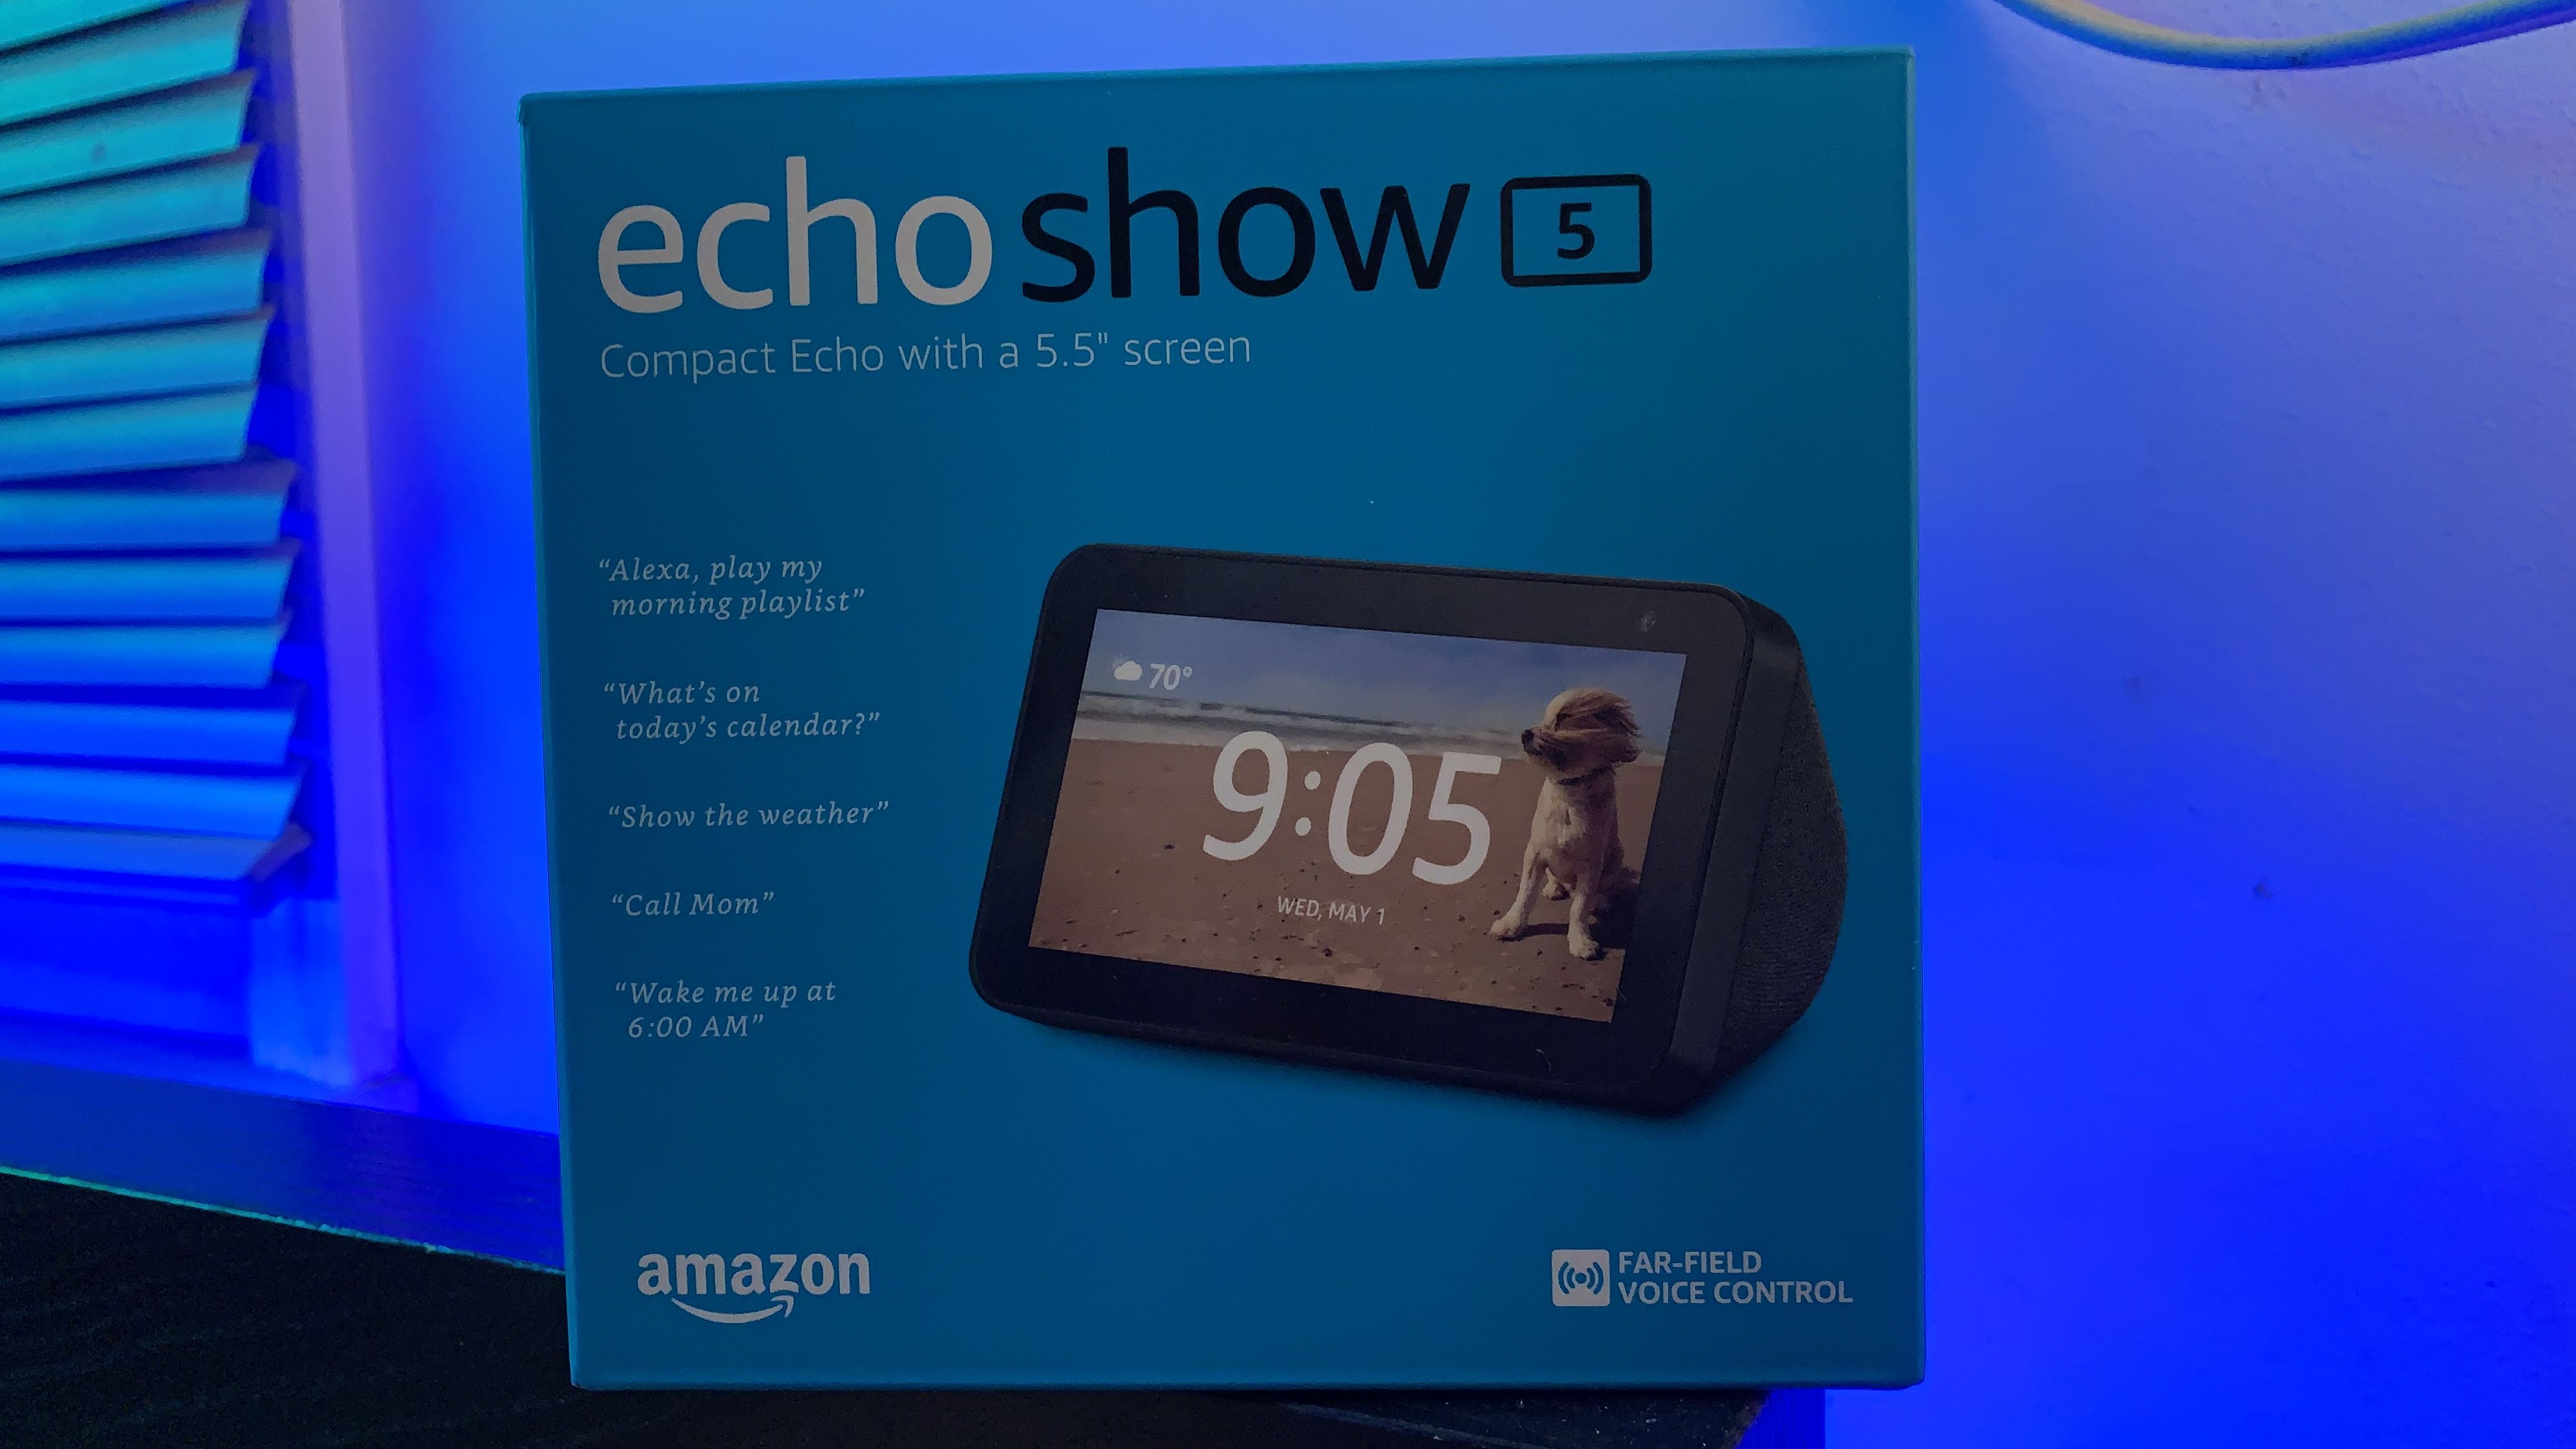 Echo Show 5 review: An impressive compact smart speaker at an  unbeatable price